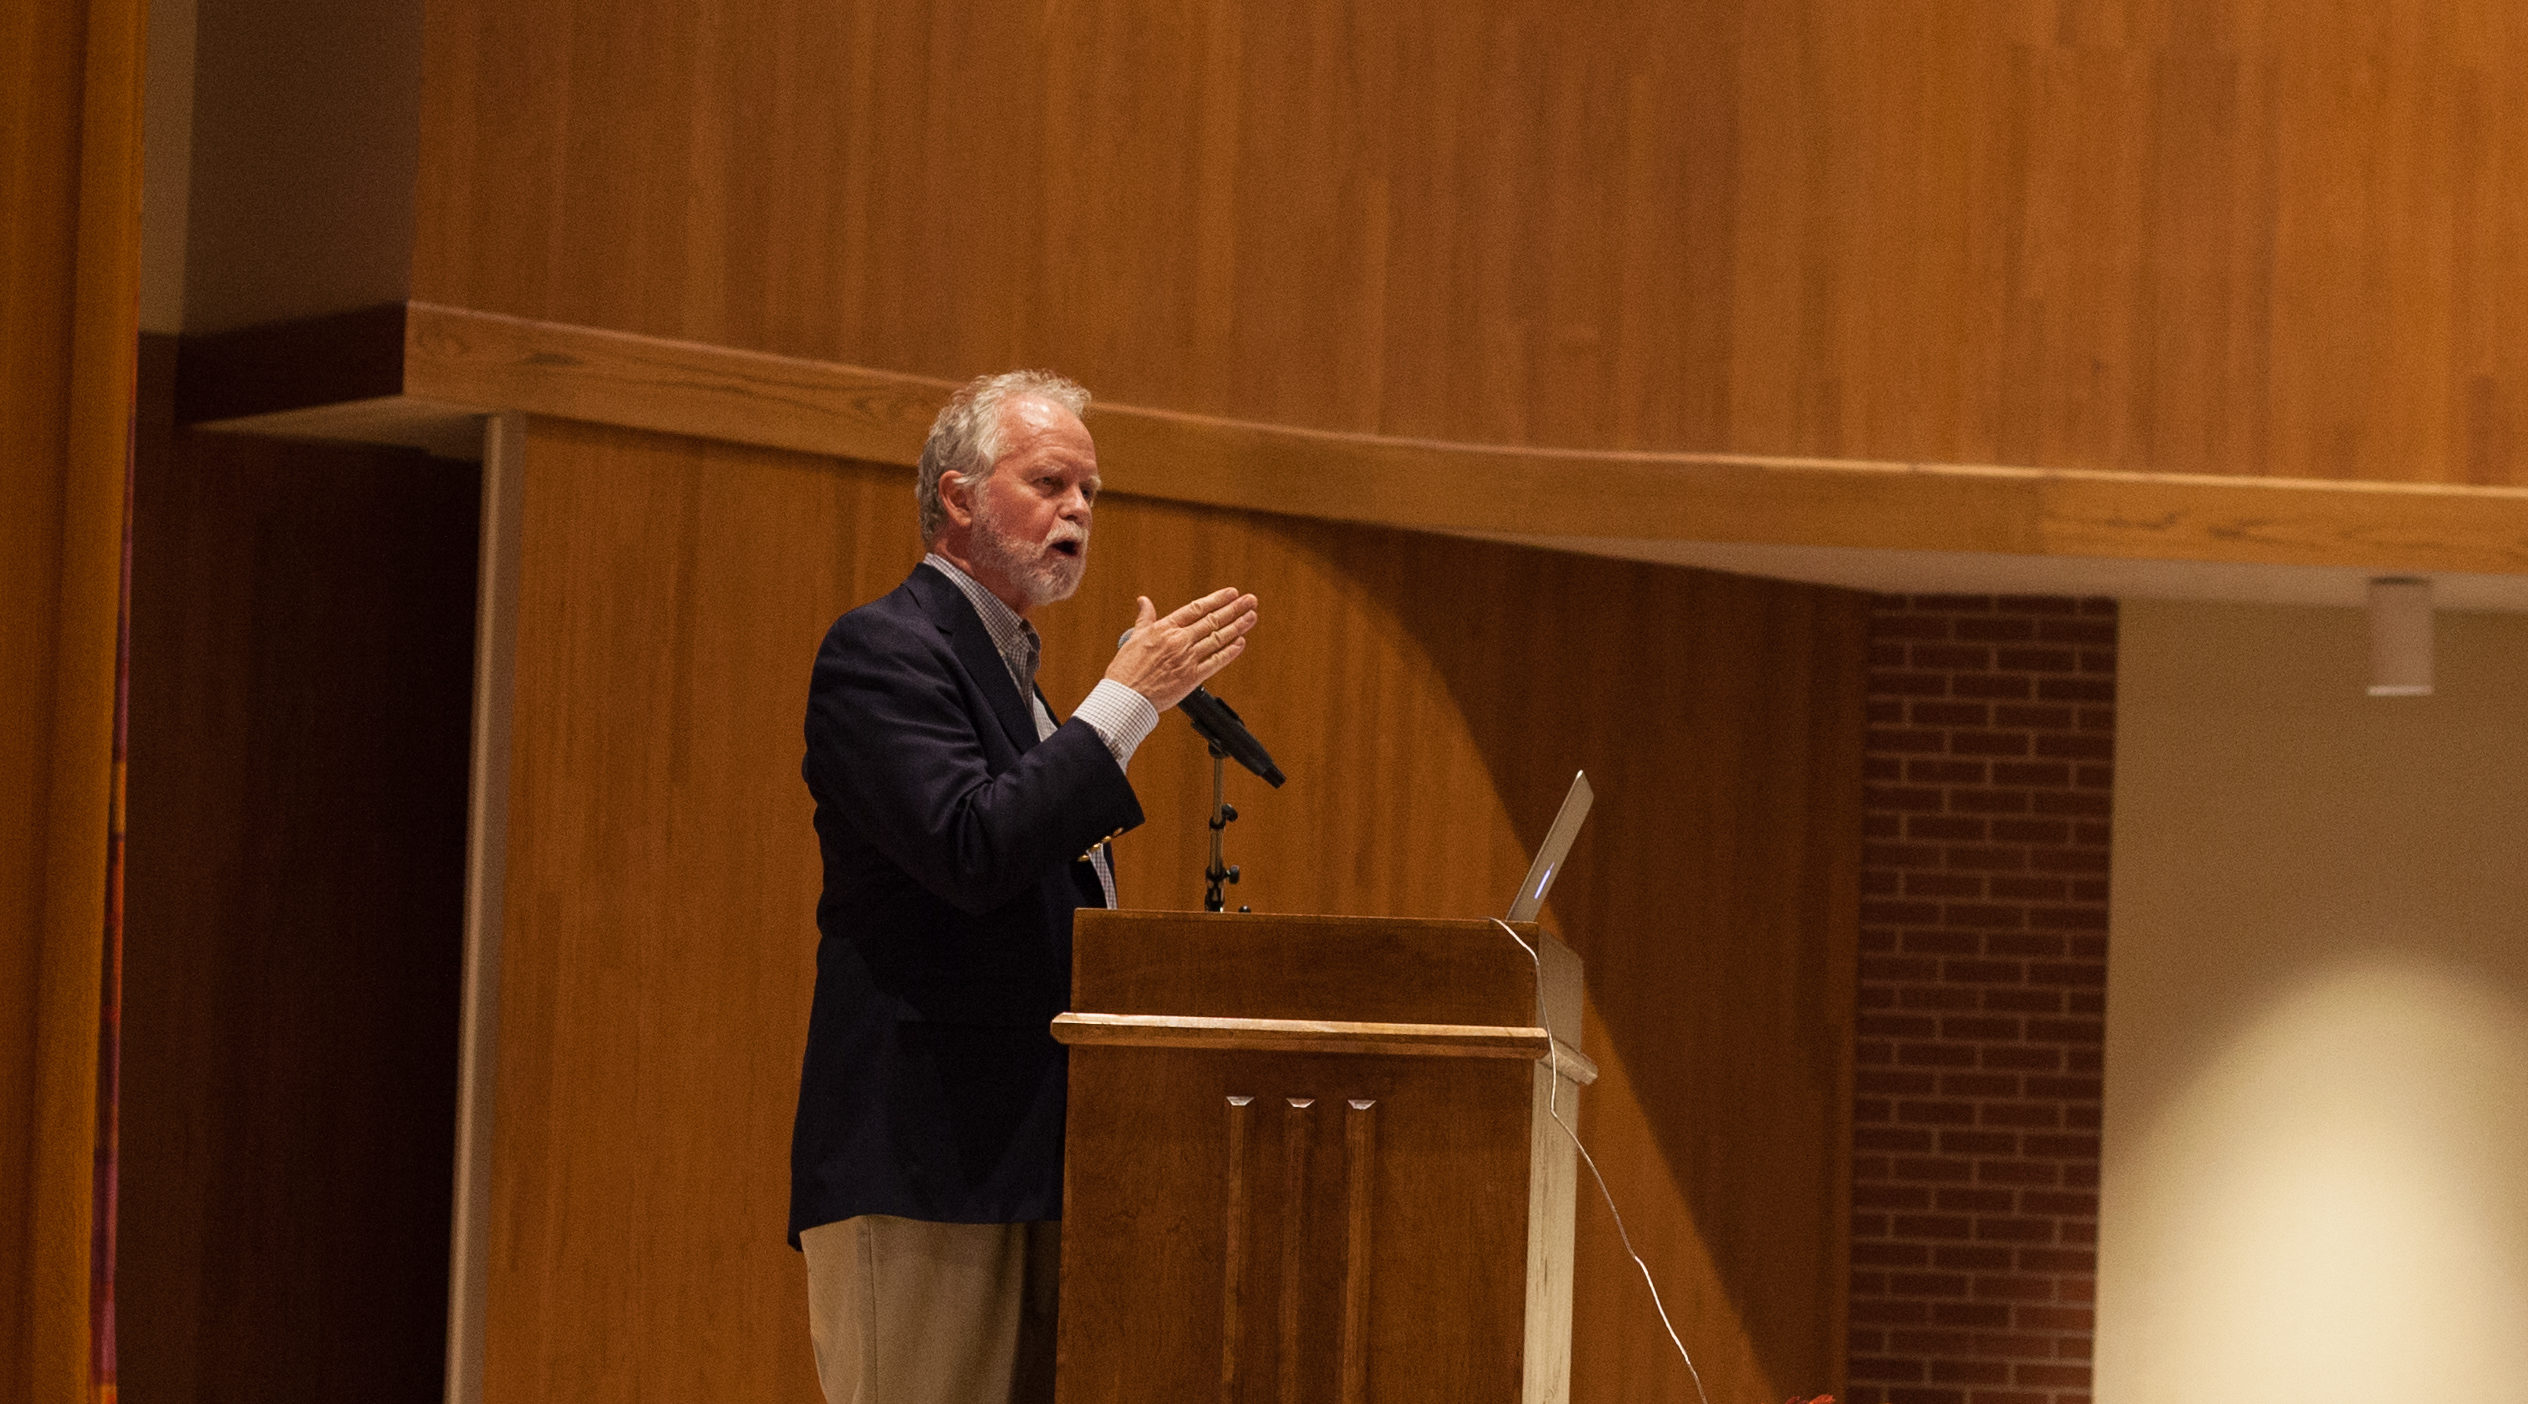 Dr. Steven Garber presents lecture “Meaningful Work for the Common Good” at Ouachita.